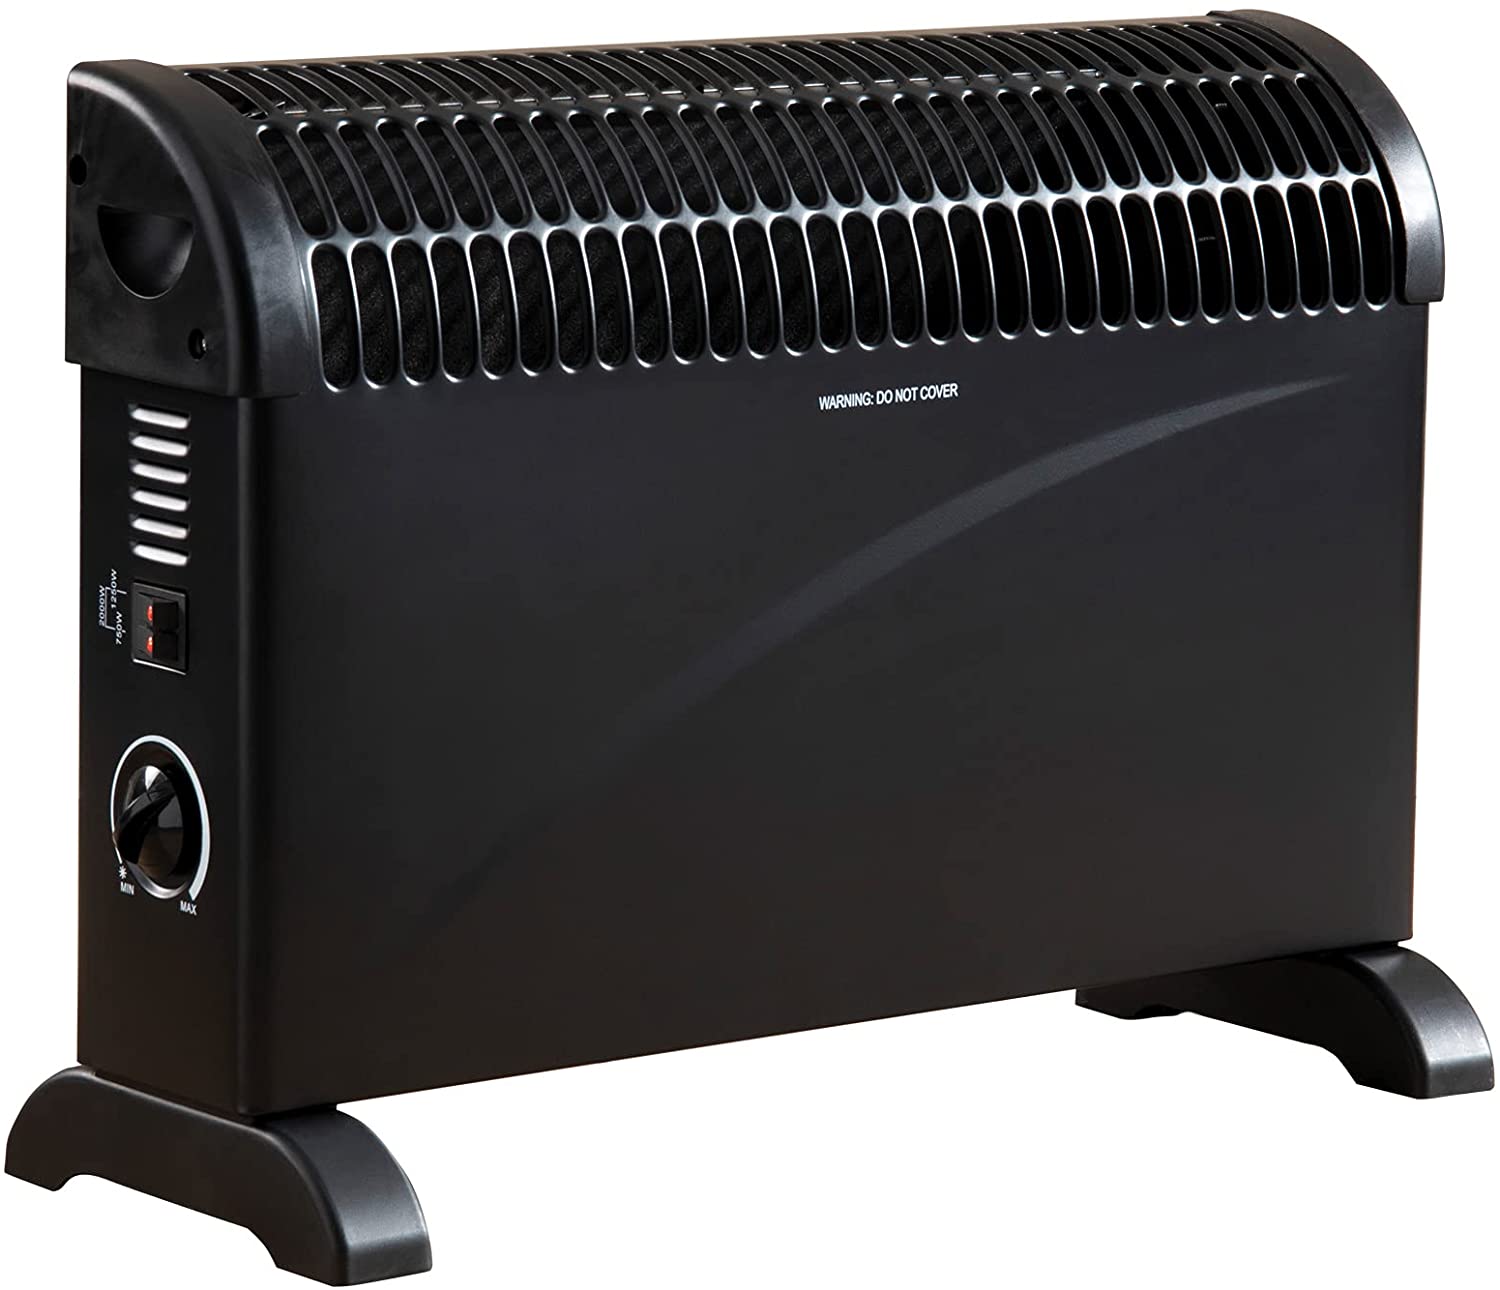 Daewoo Portable Electric Space Heater Convector/Radiator 2000W